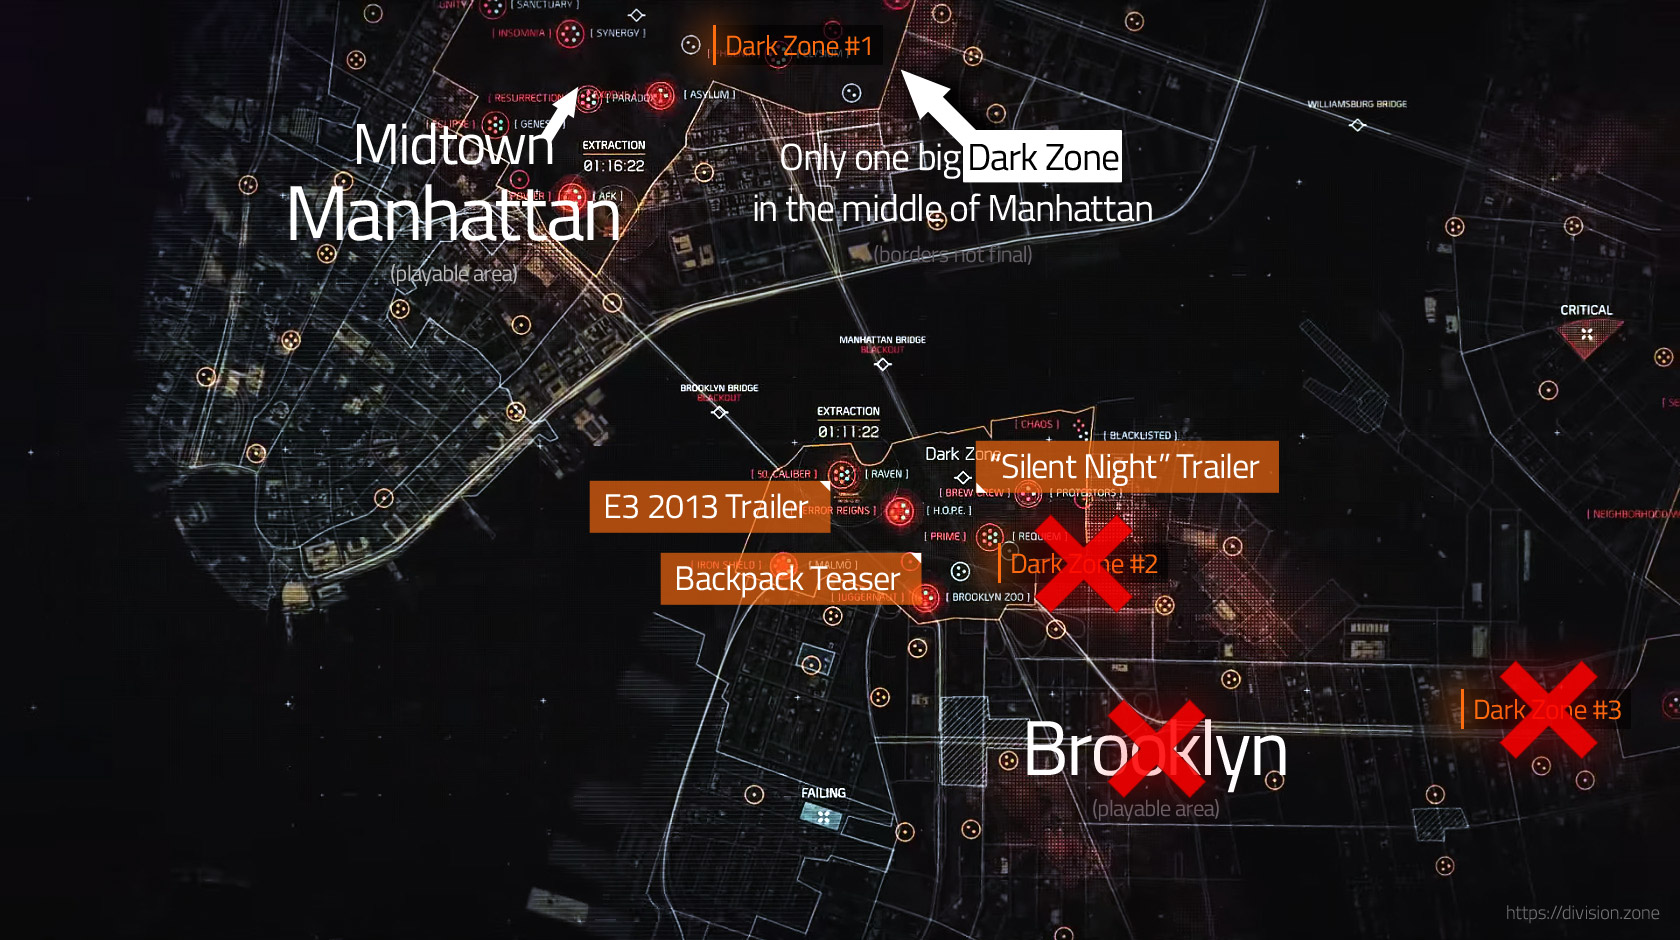 52baded7_tc-the-divsion-2013-multiple-dark-zones-brooklyn-not-in-game.jpeg